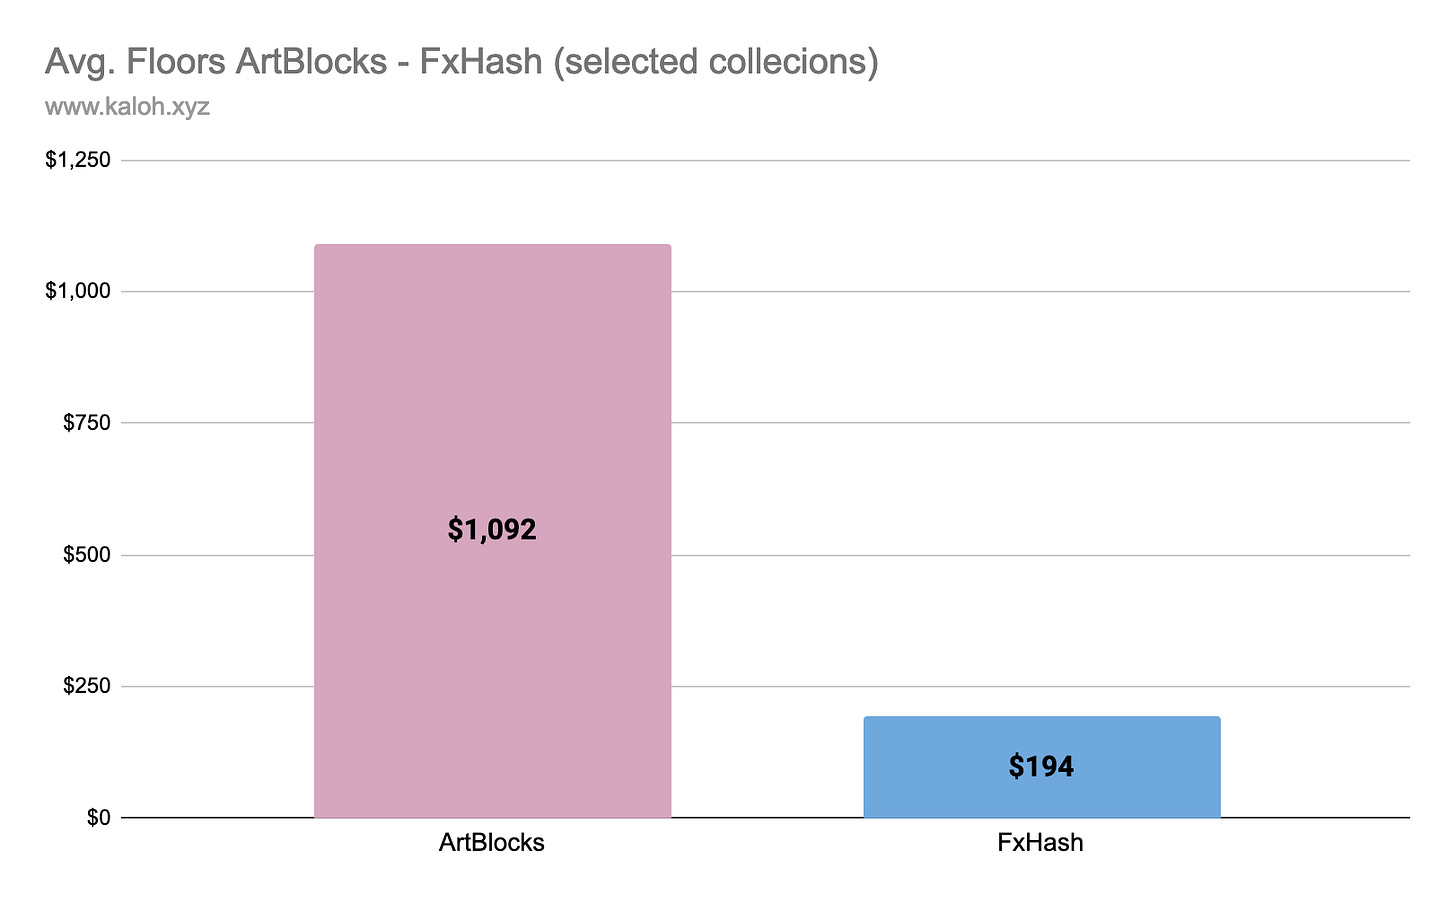 The average floors are almost x10 higher on ArtBlocks (on the selected collections).